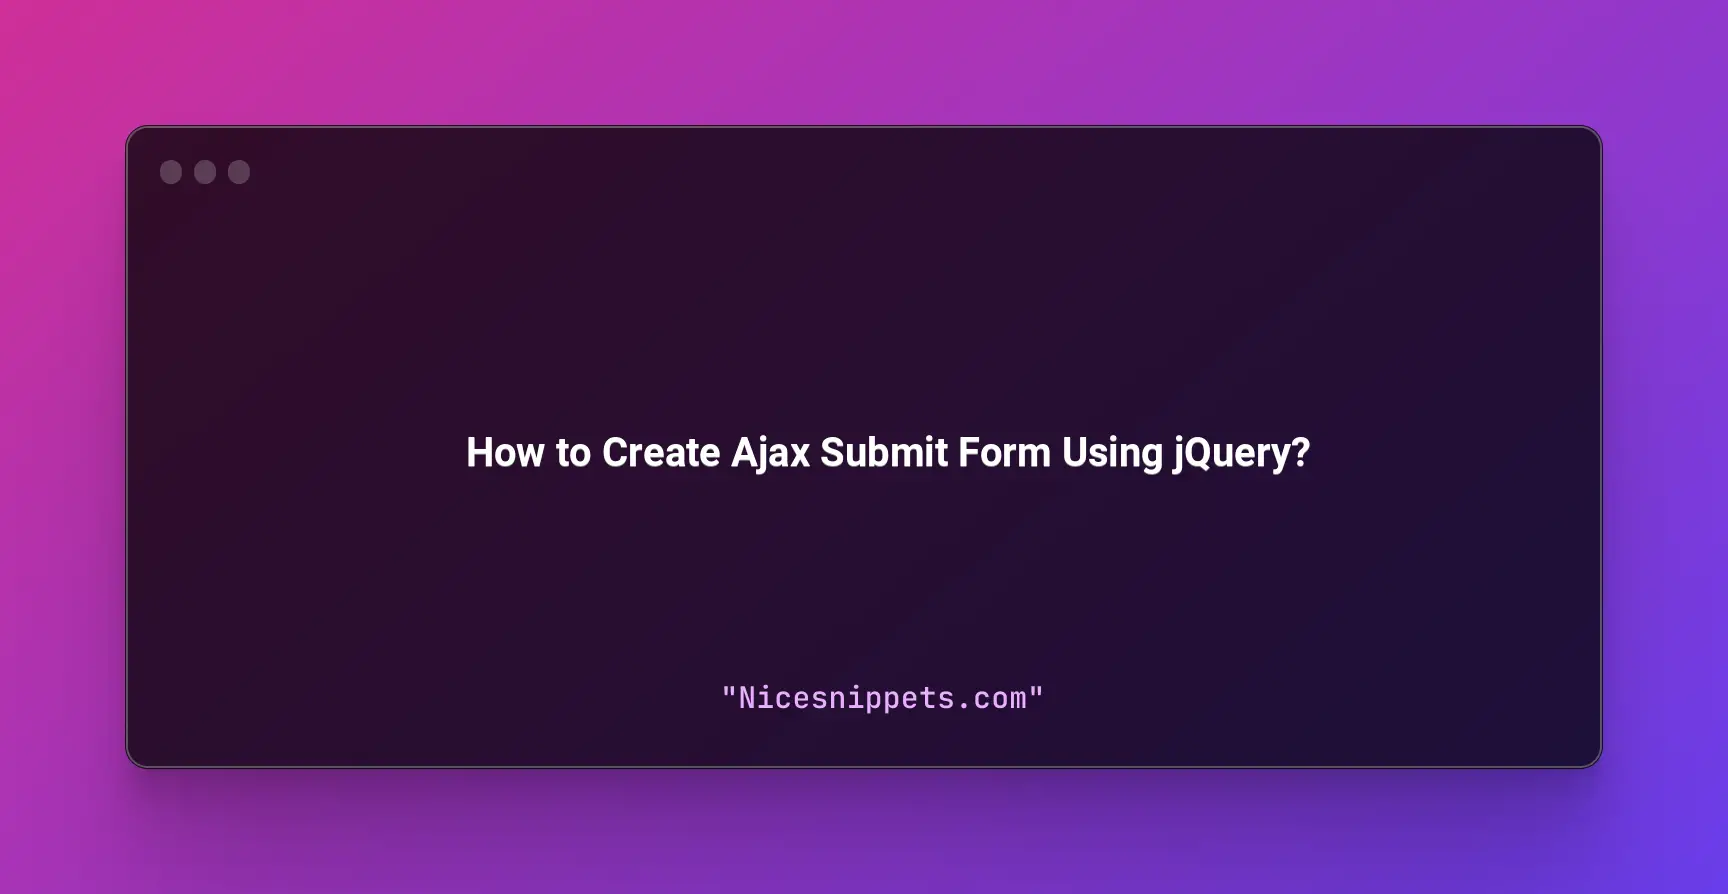 How to Create Ajax Submit Form Using jQuery?